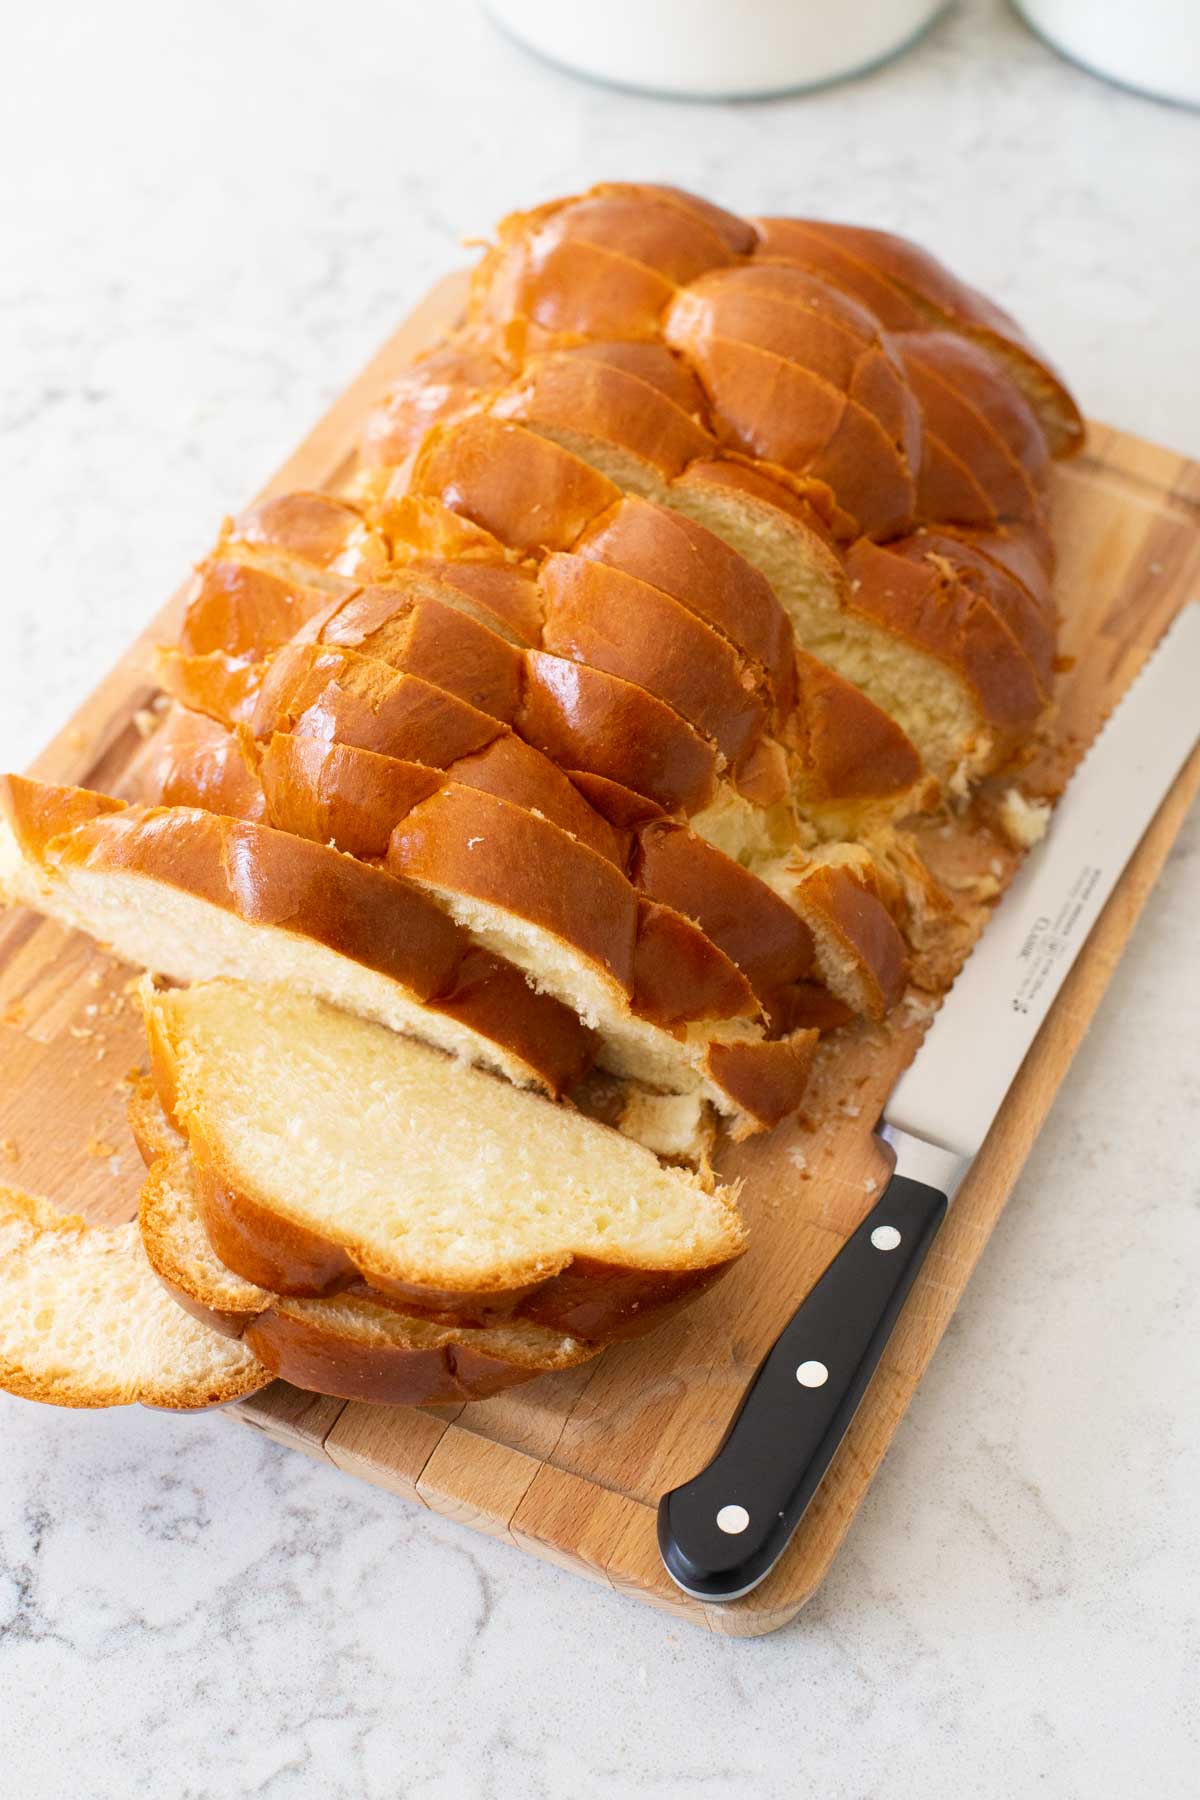 A fresh loaf of challah bread has been sliced for making french toast.